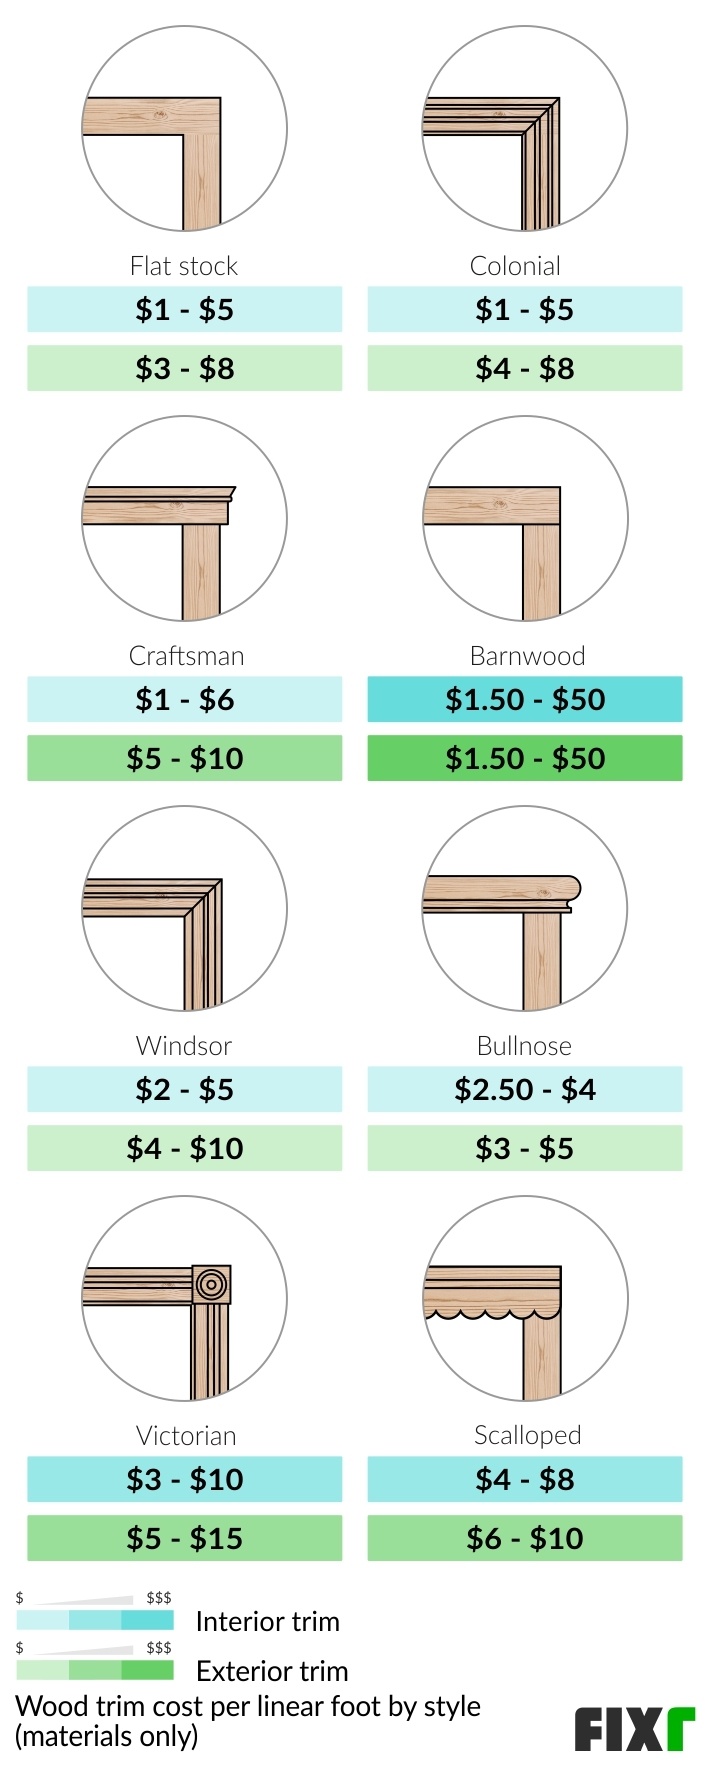 Cost per Linear Foot of Interior or Exterior Wood Trim by Style: Flat Stock, Colonial, Craftsman, Barnwood, Windsor...